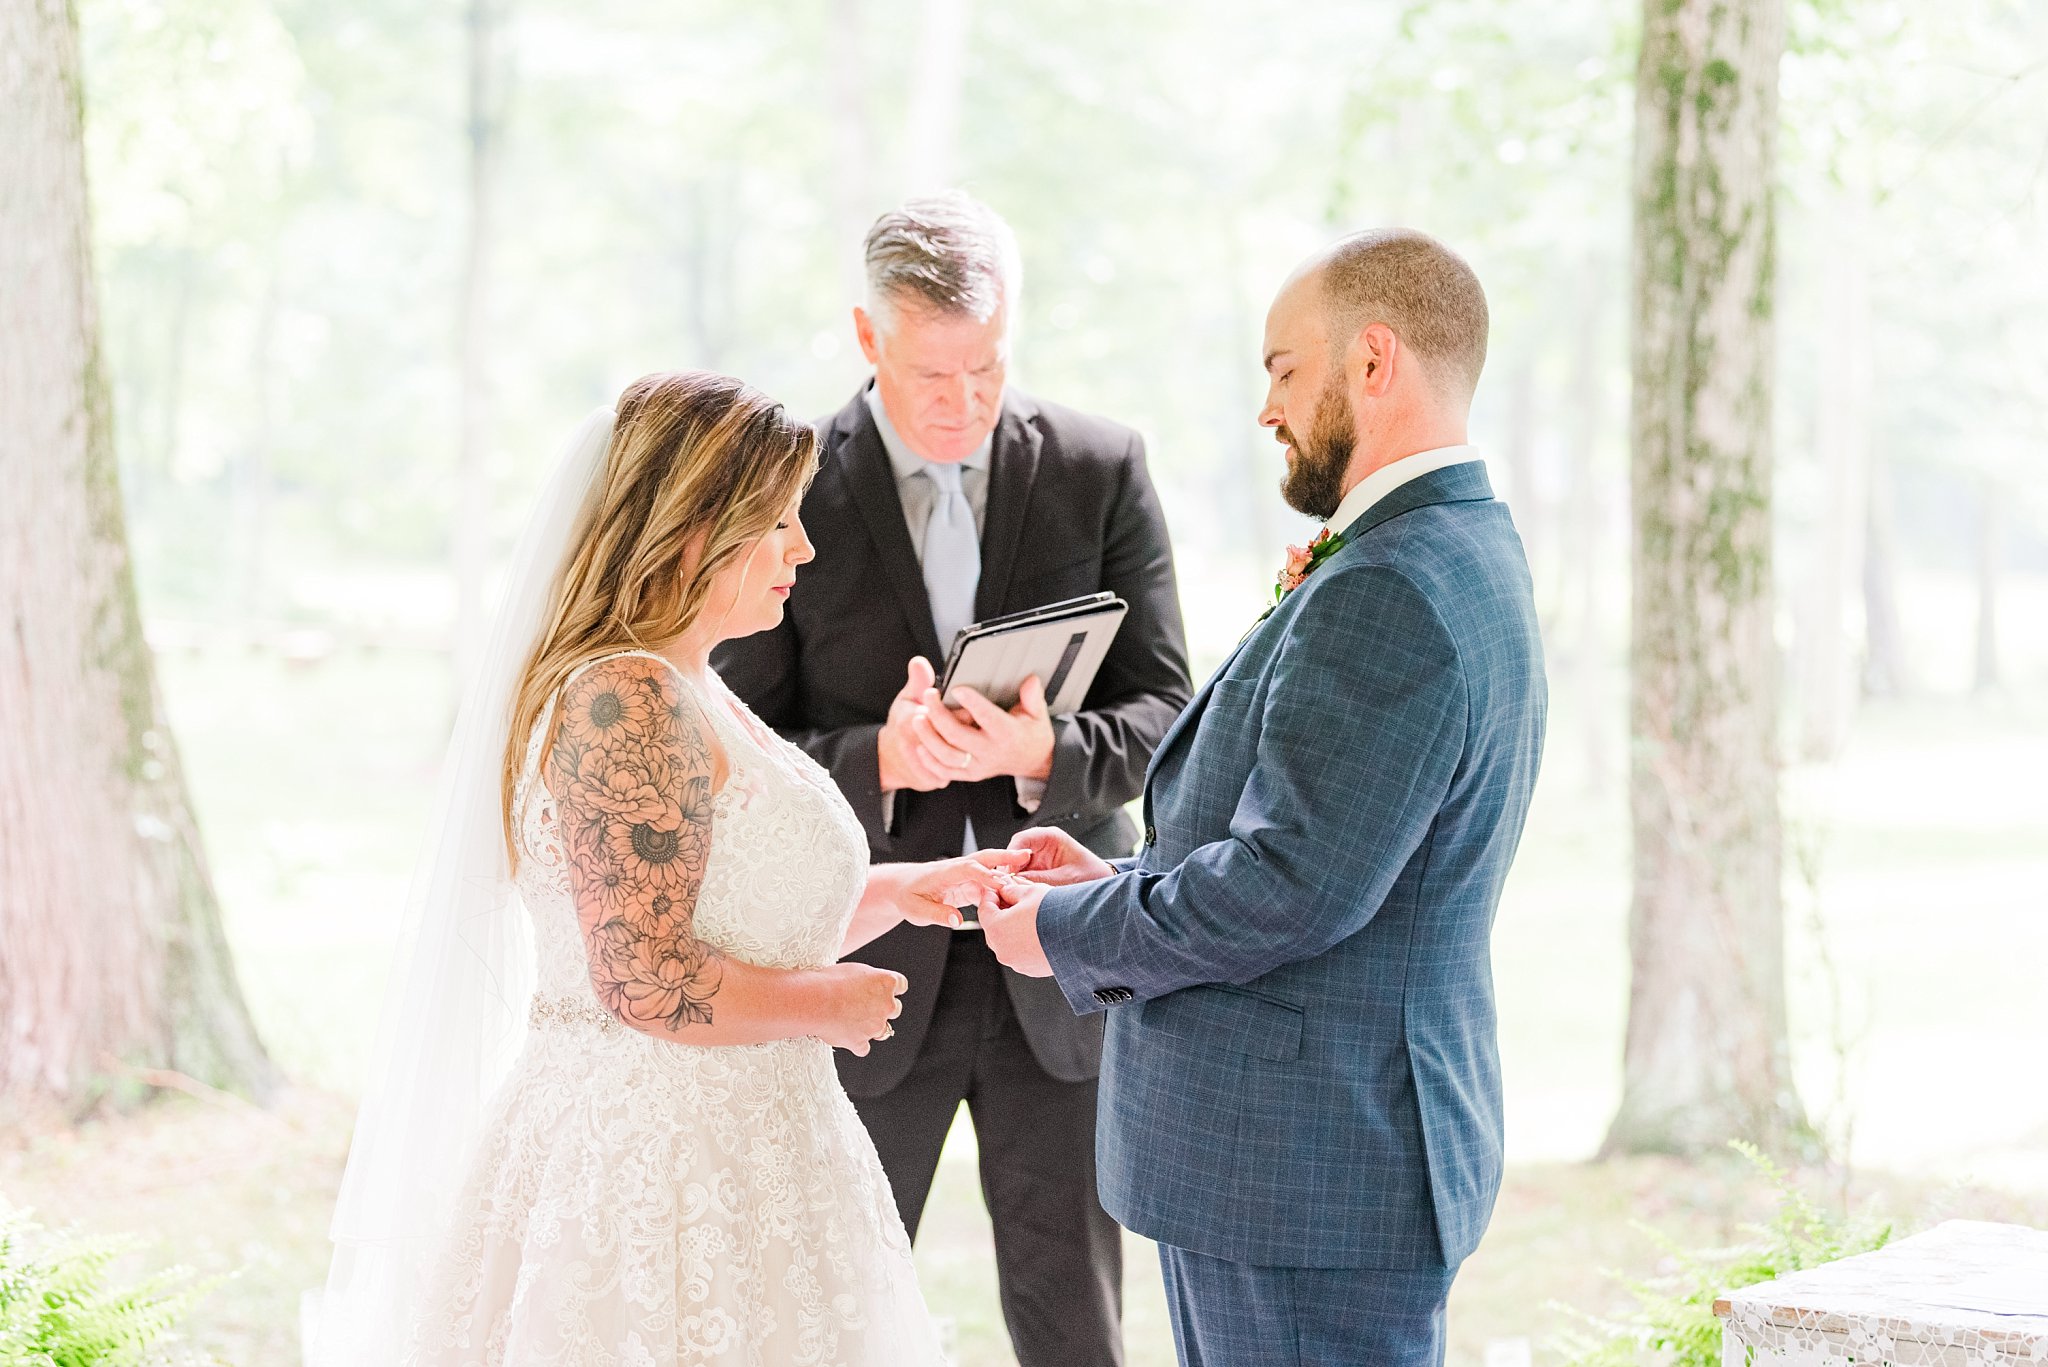 the groom puts a ring on the bride's finger